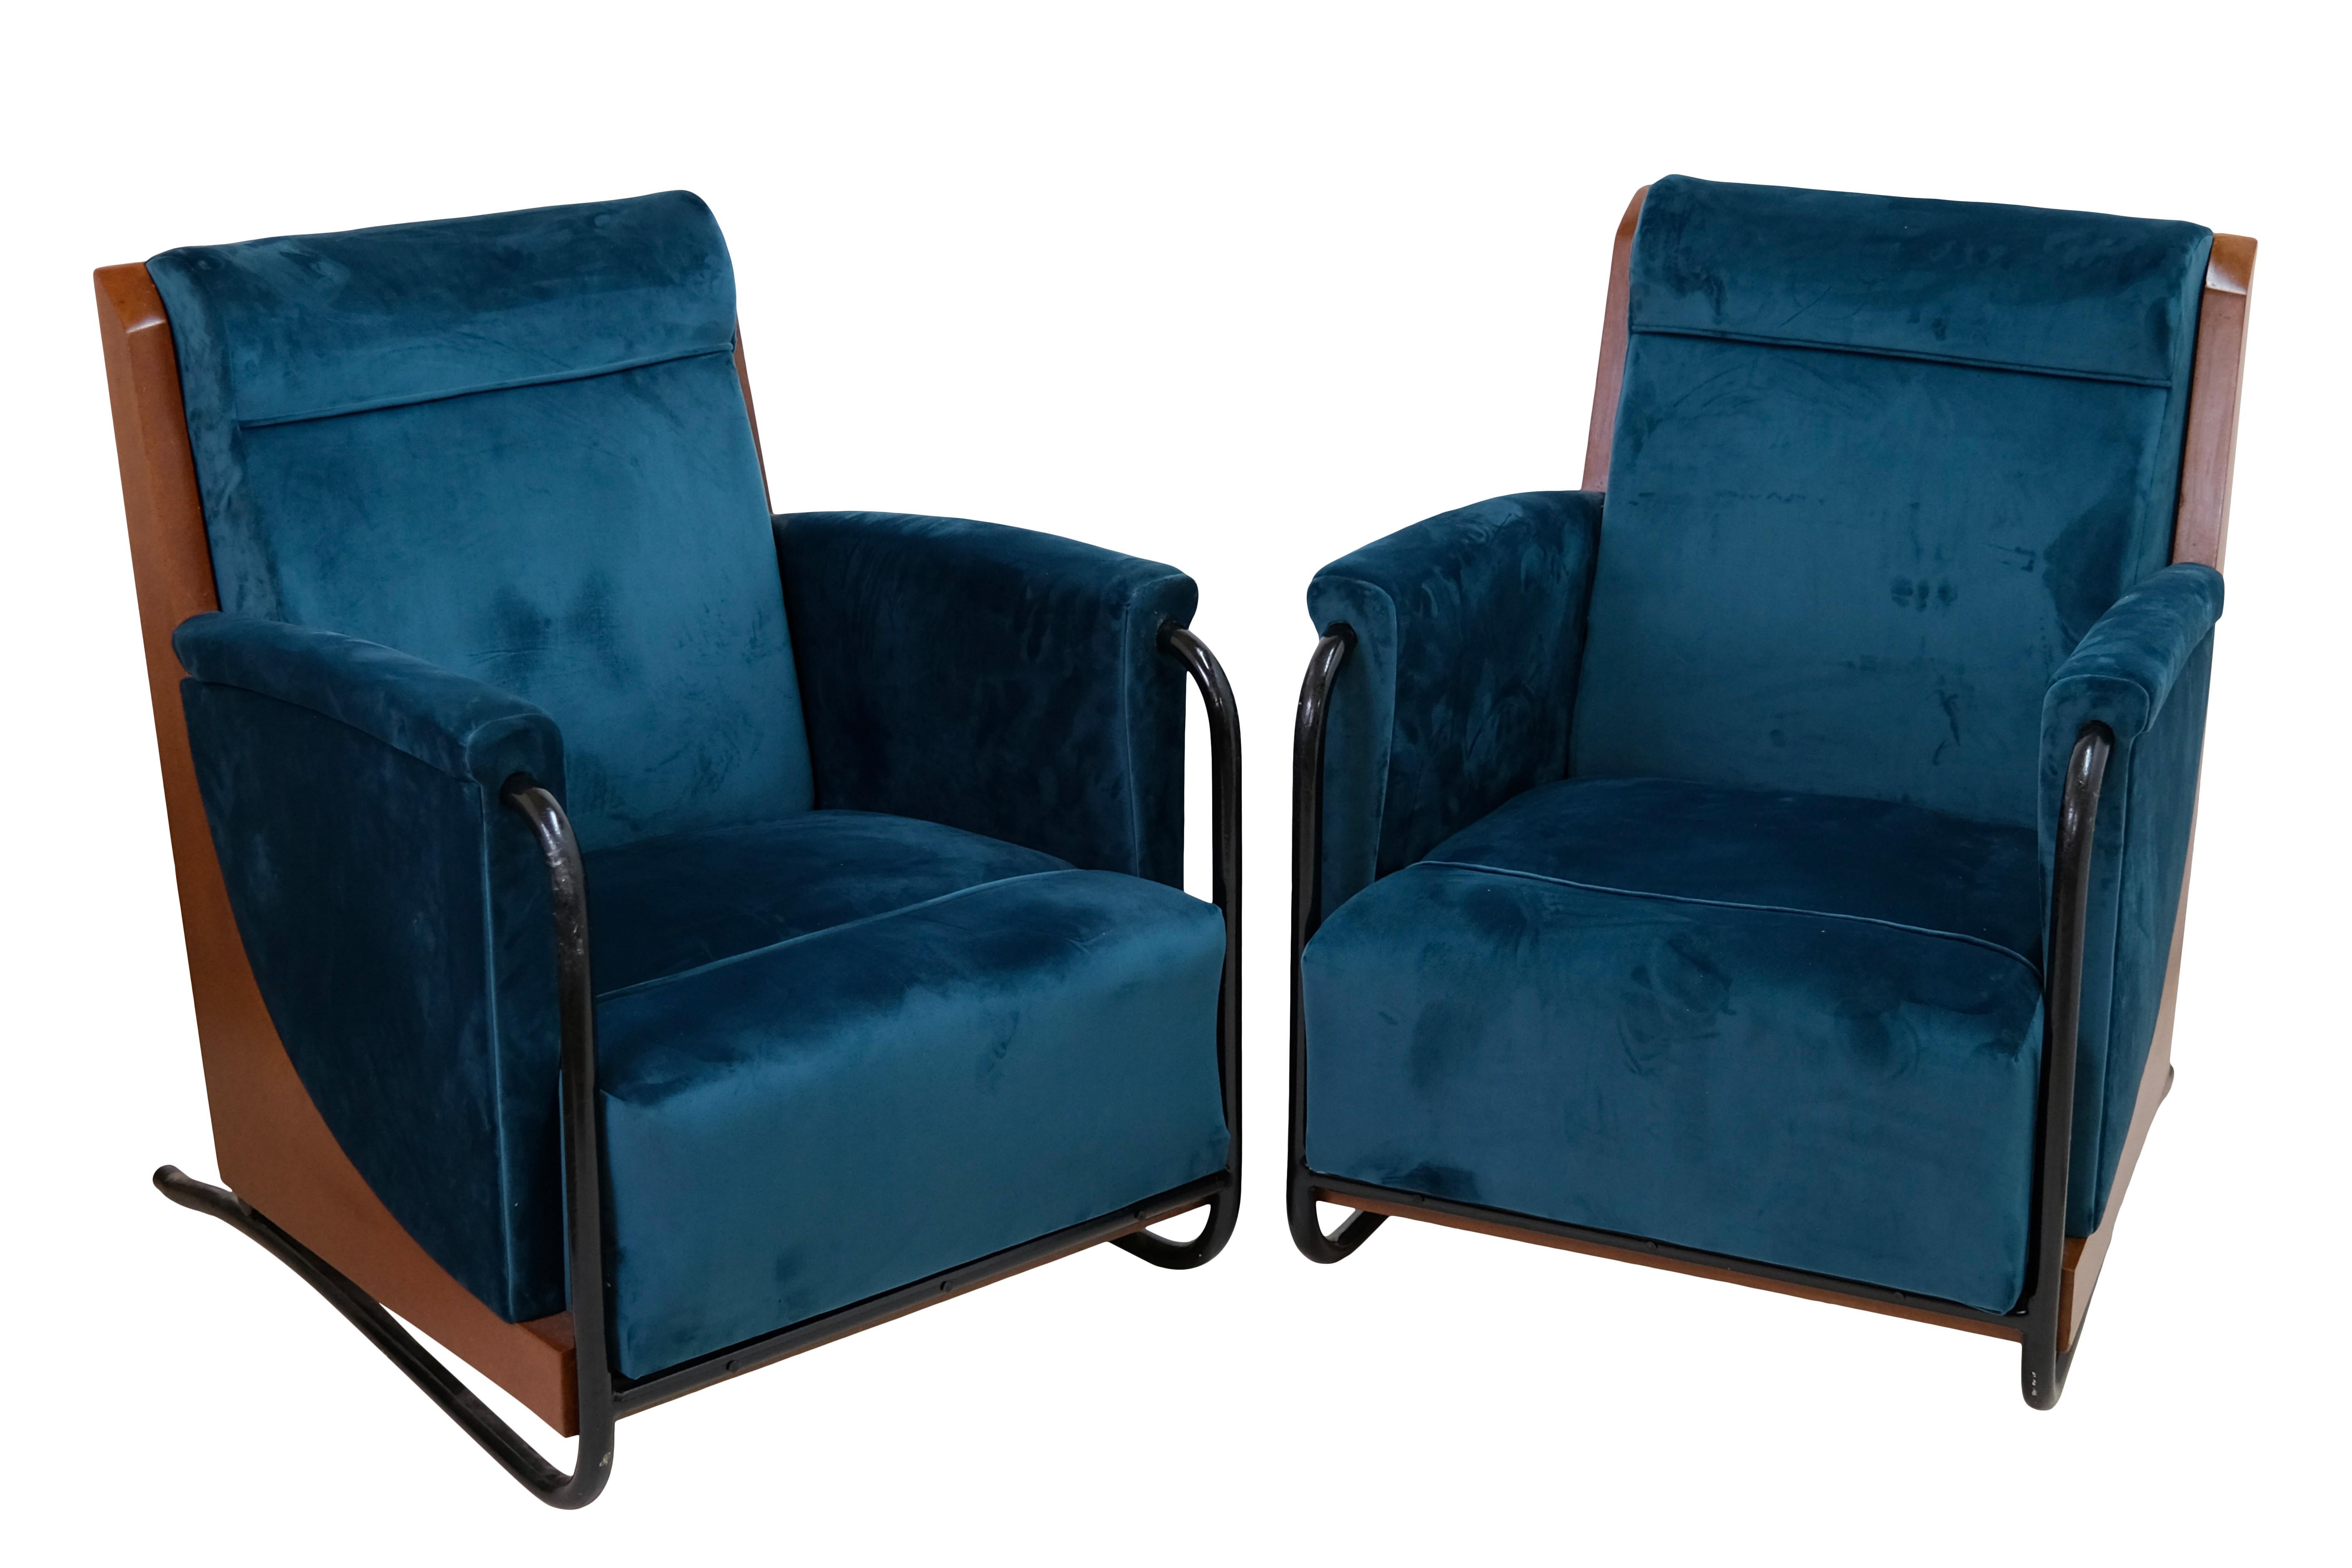 Pair of armchairs
Black steel tubes
Mahogany stained backrest
Petrol coloured velour

Midcentury, 1950s

Dimensions:
Width: 73 cm
Height: 88 cm
Depth: 83 cm
Seat height: 40 cm